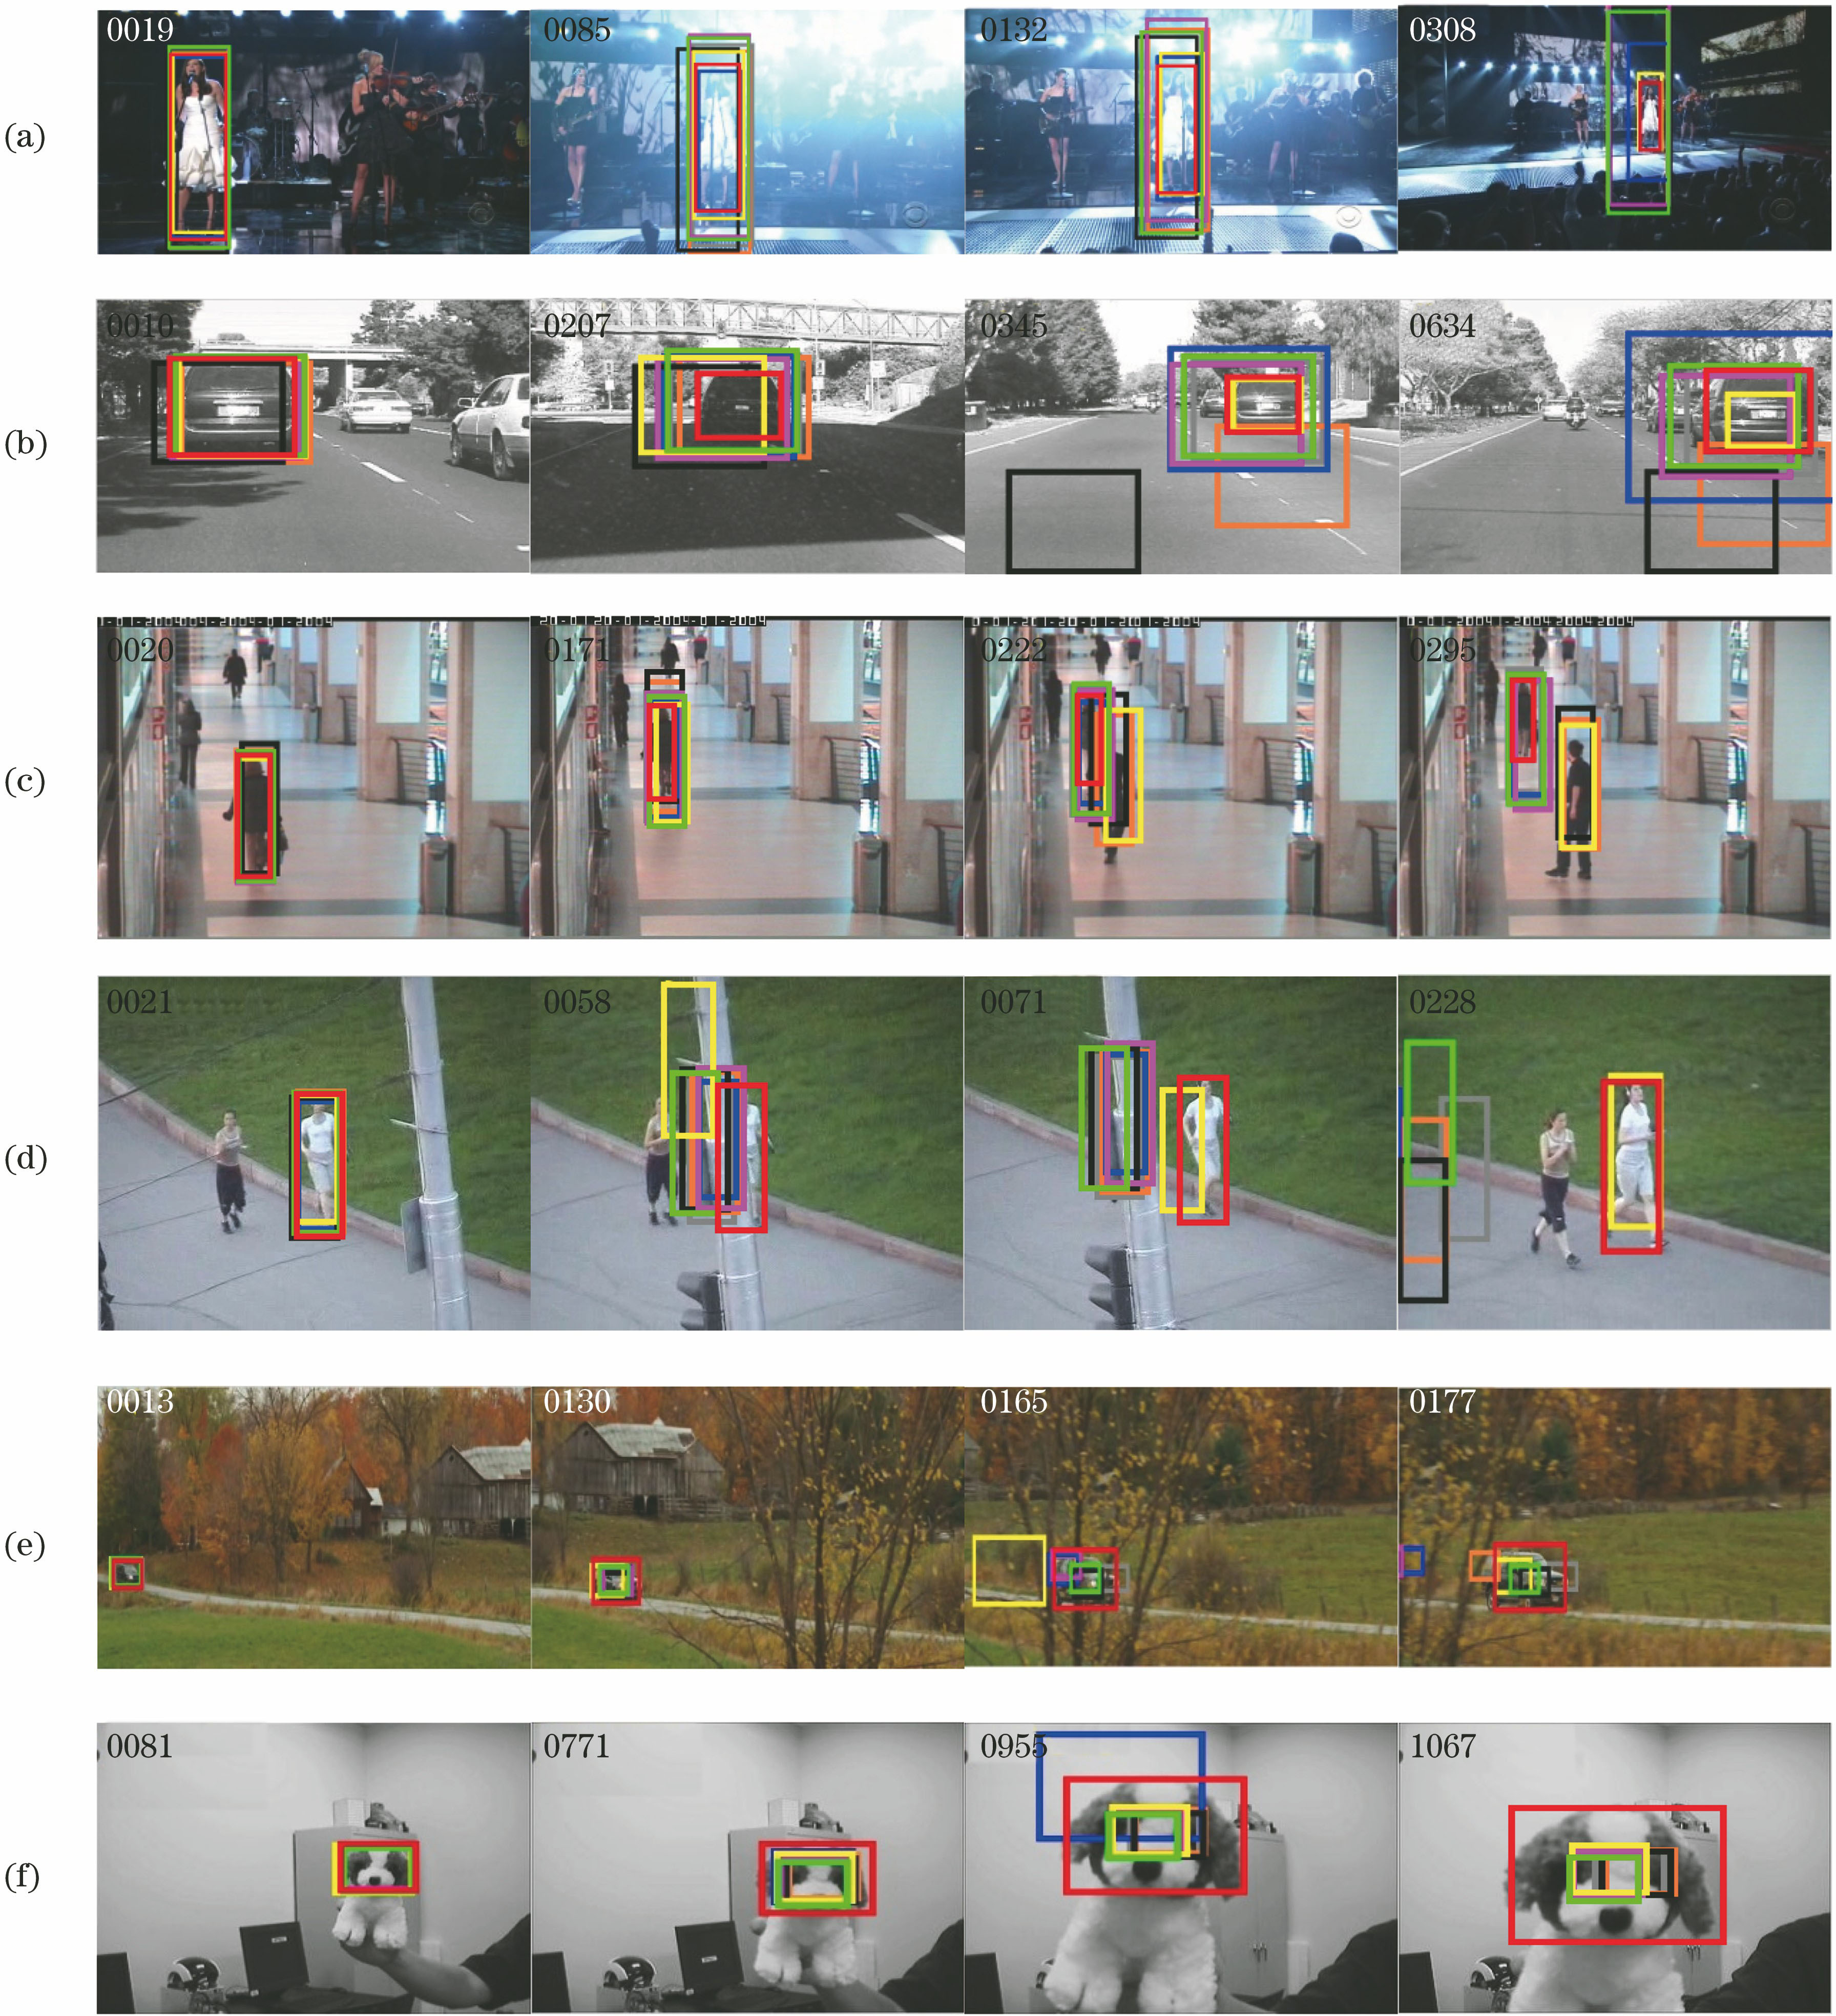 Comparison of tracking results of different algorithms. (a) Singer1; (b) Car4; (c) Walking2; (d) Jogging2; (e) CarScale; (f) Dog1